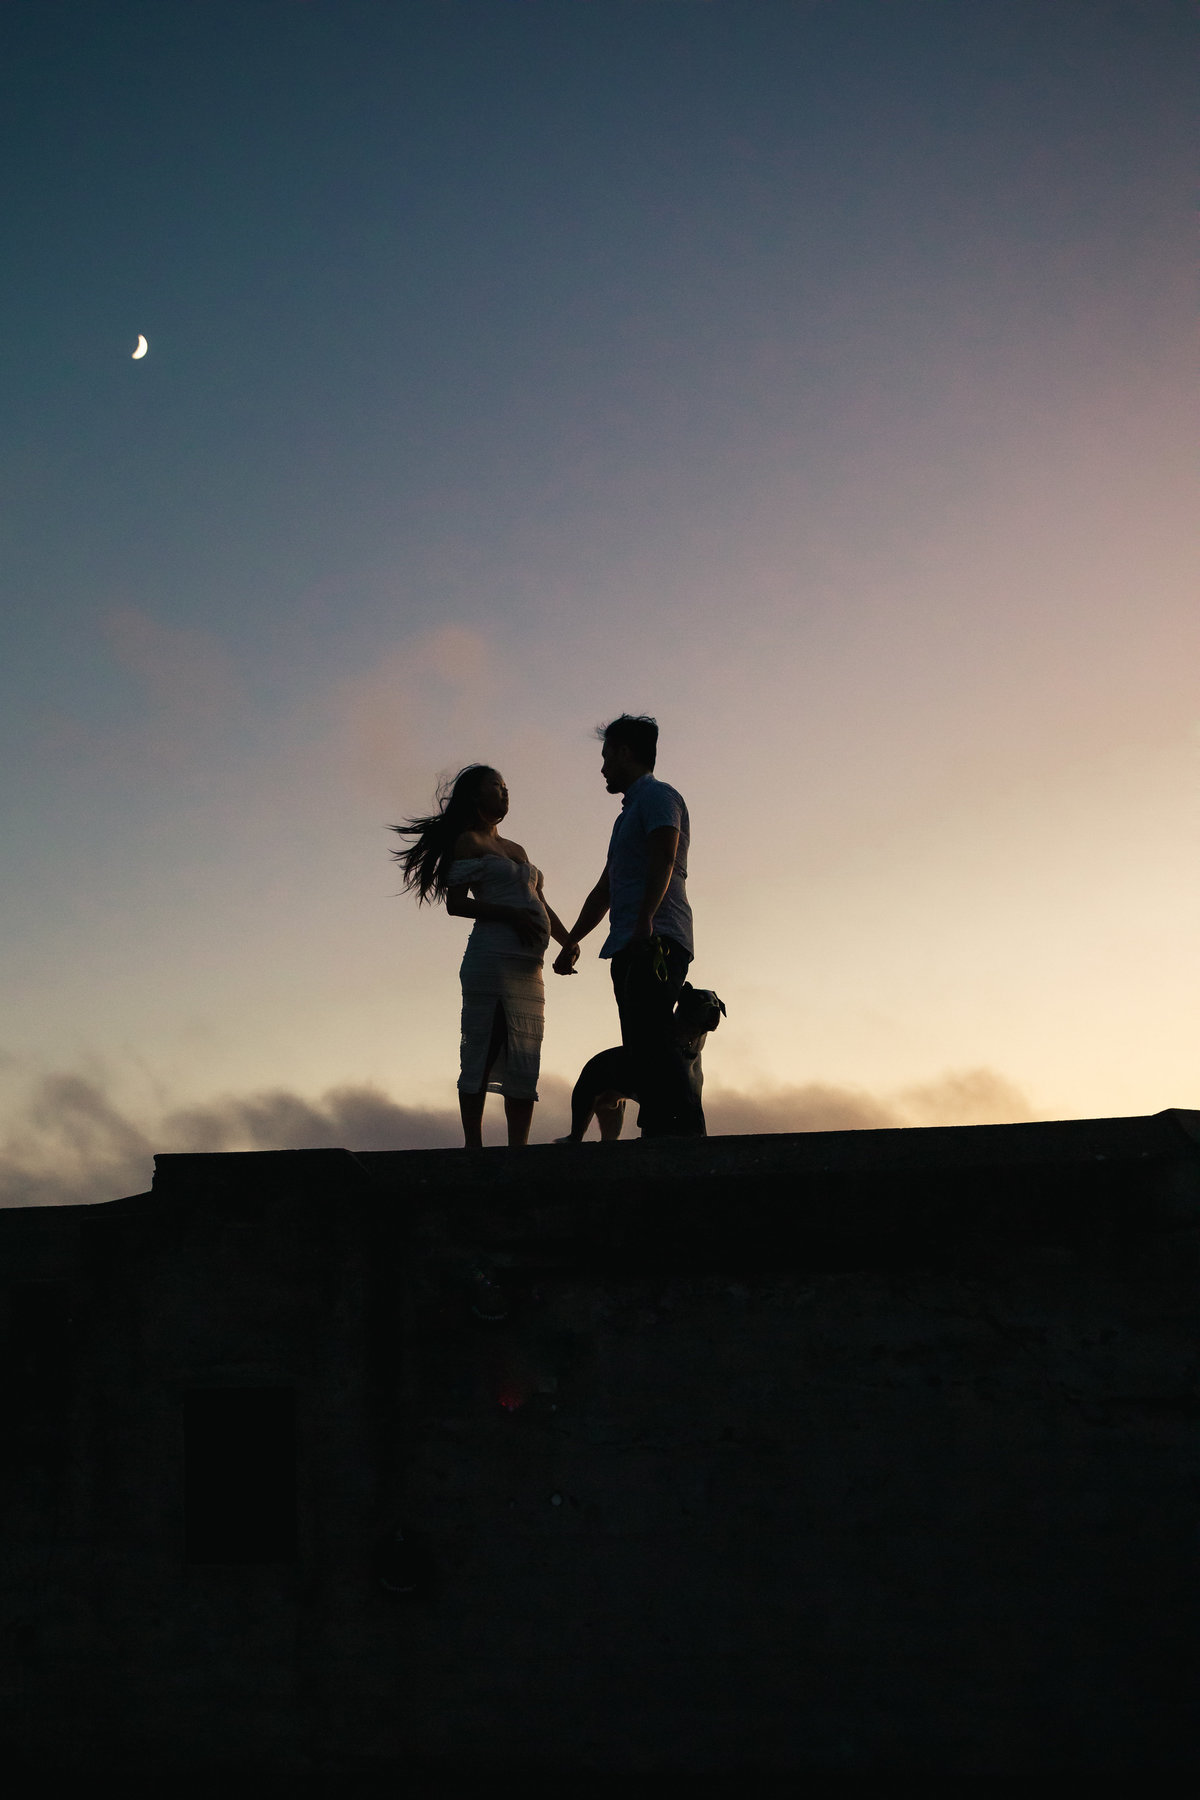 Bay Area maternity couple standing and  holding hands with dog at side. Silhouette with blue sky and moon above